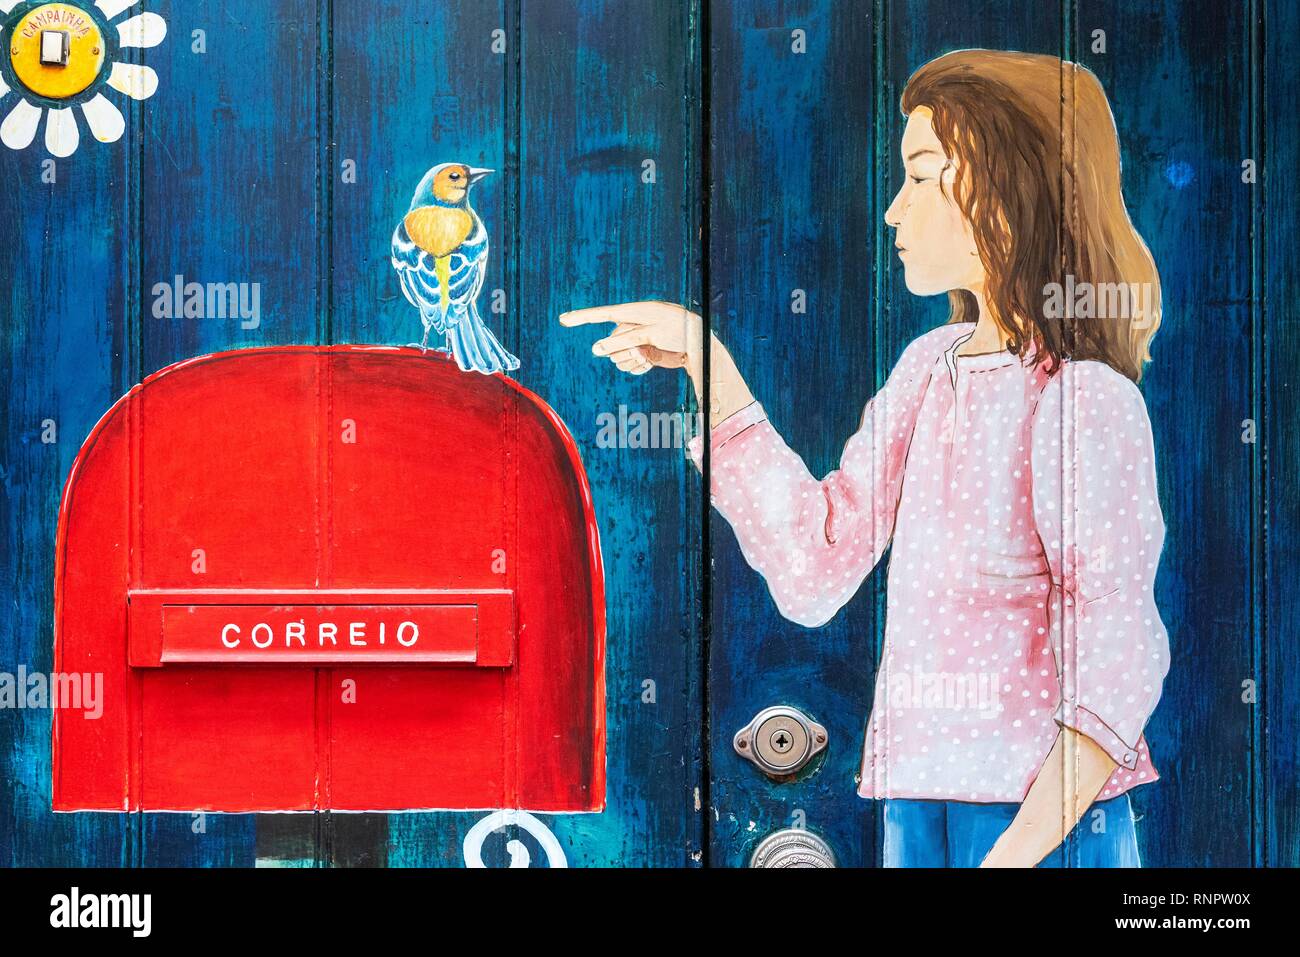 Young girl and bird, letterbox, artfully painted front door, painting, street art, Funchal, Madeira, Portugal Stock Photo